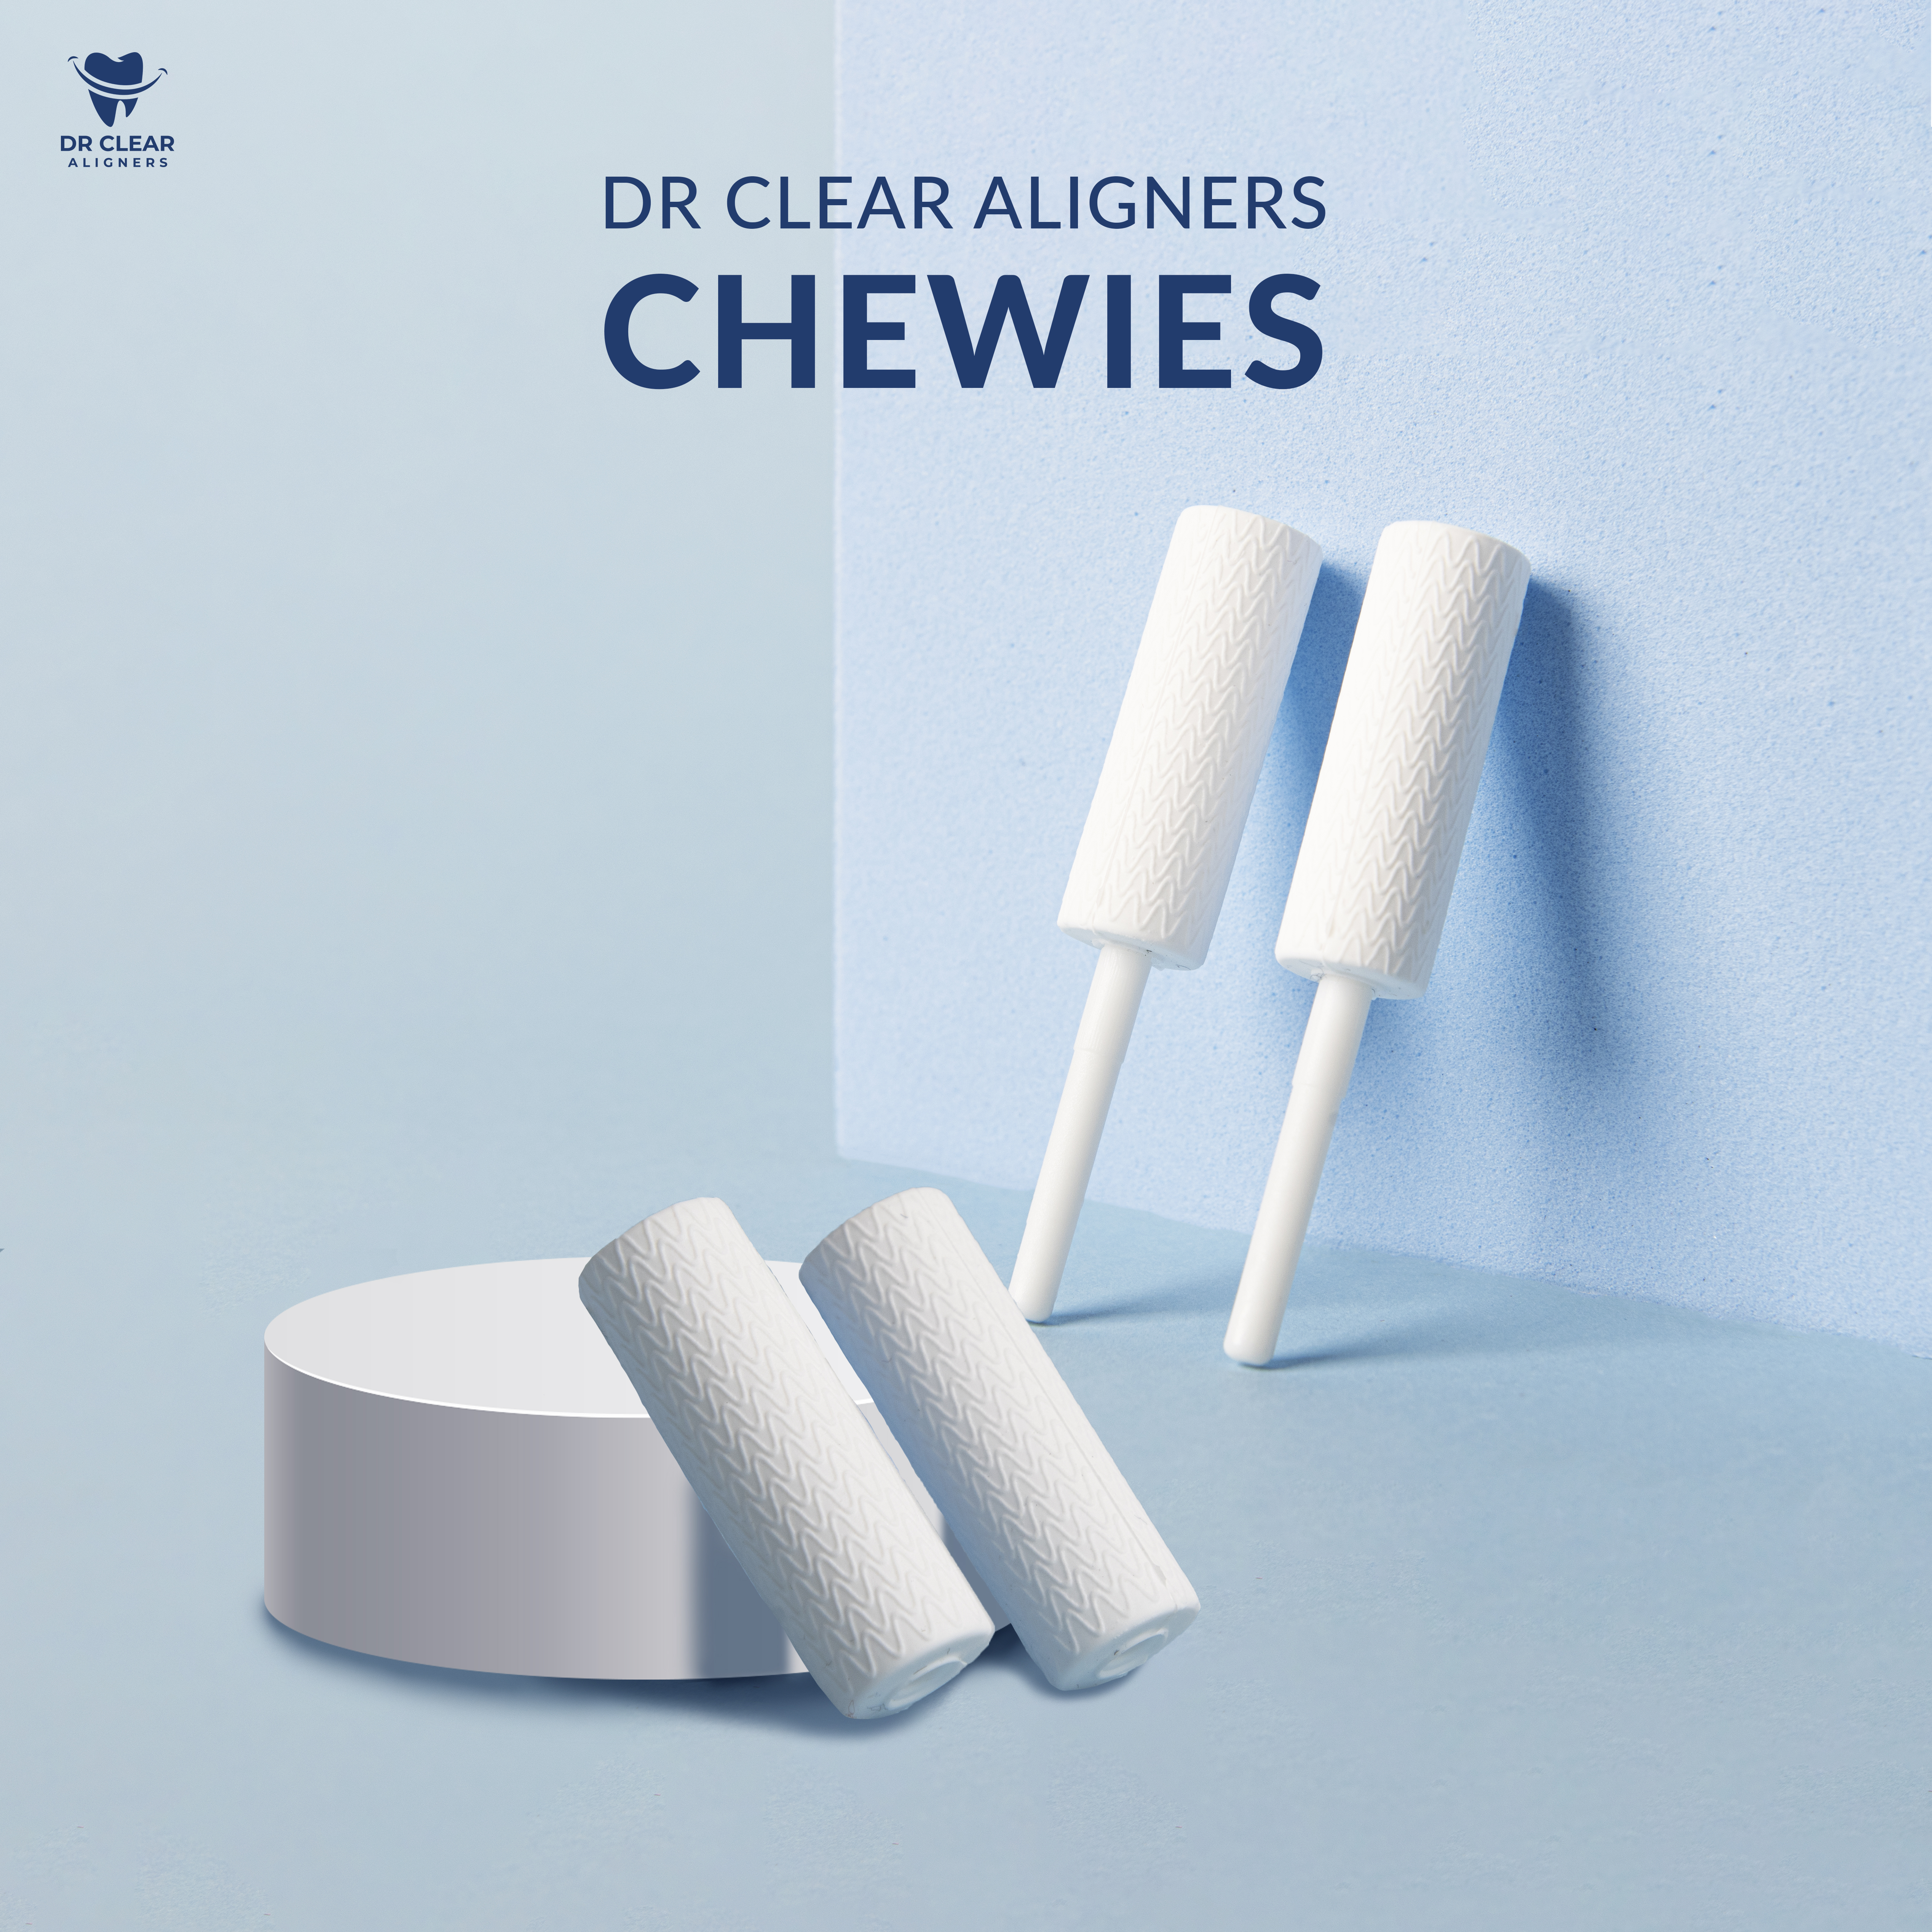 Aligners Chewies 1 pack (2 pcs chewies)